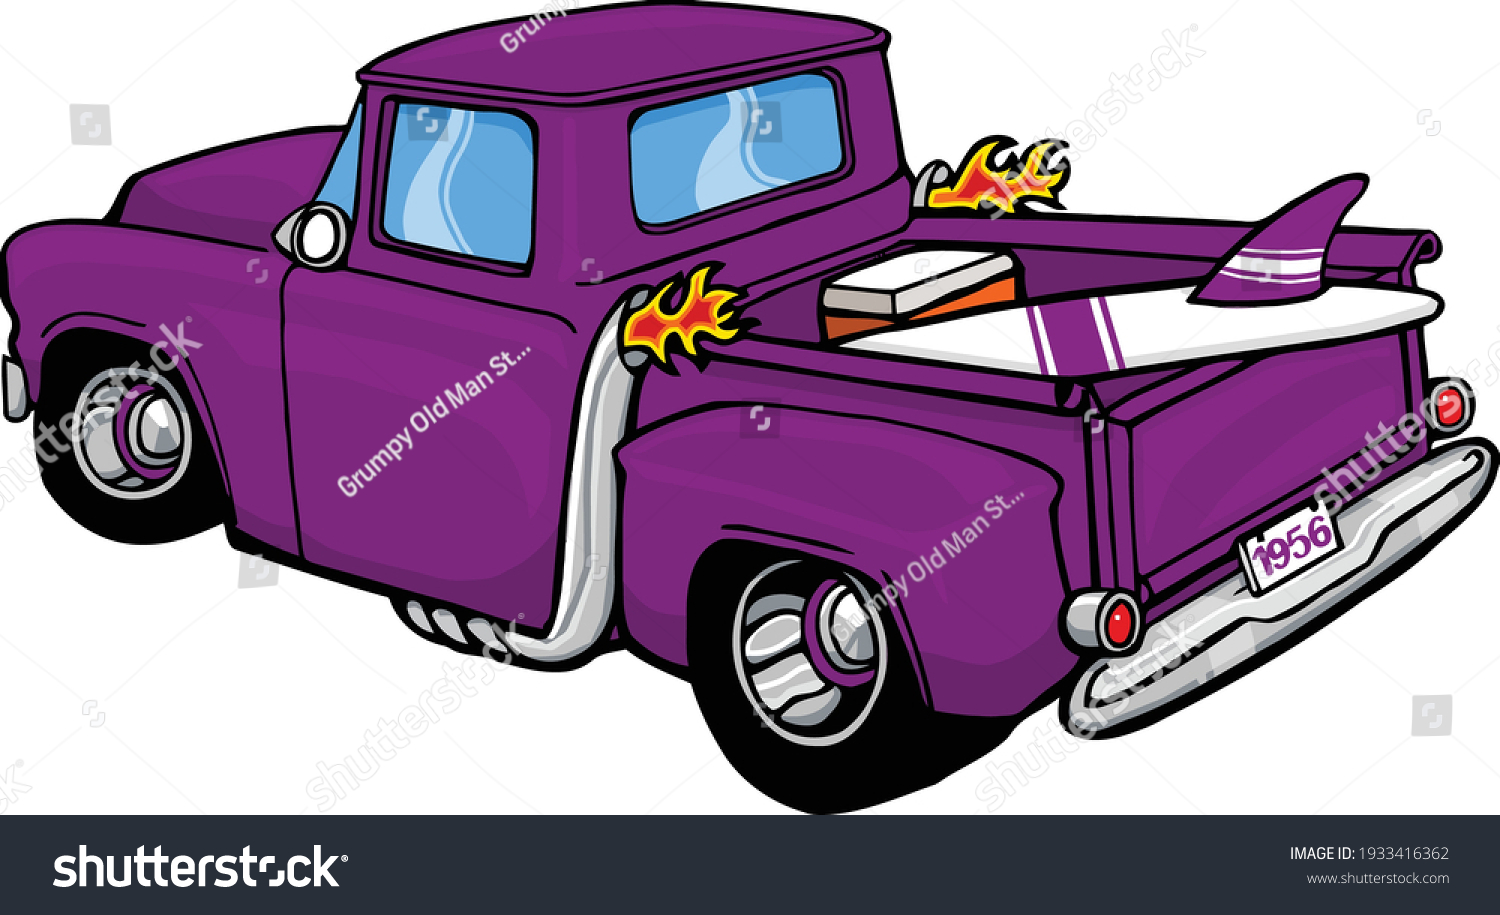 SVG of Hitting the beach after getting some serious work done. This clip art piece features a classic dodge truck with surfboard and cooler in the back. svg